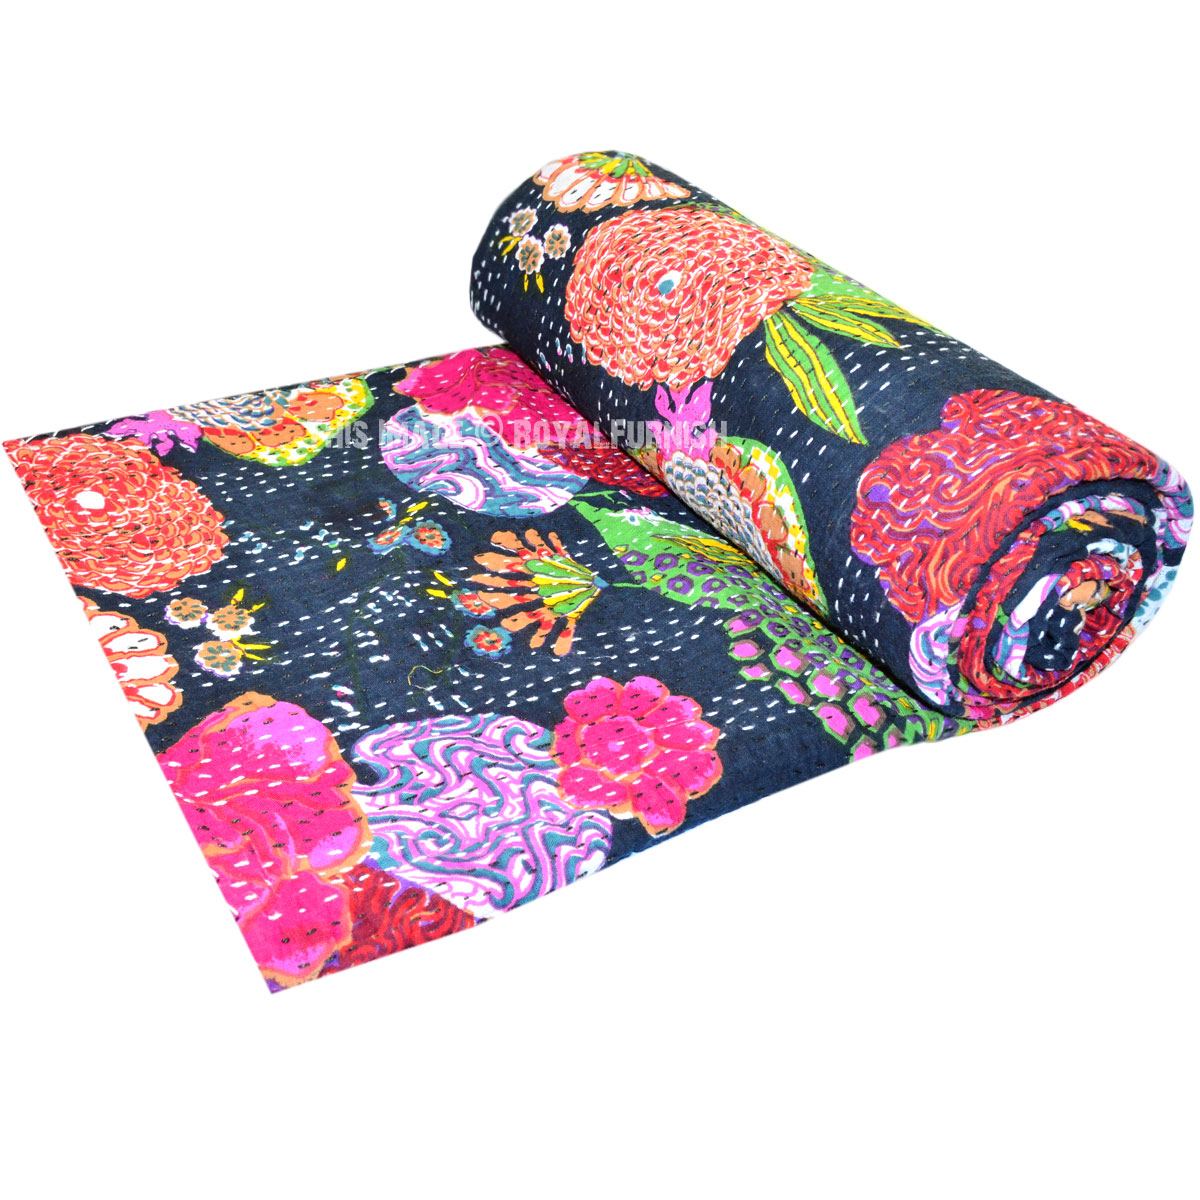 Twin Size Black Multi Flowers Printed Kantha Quilt Bedspread ...